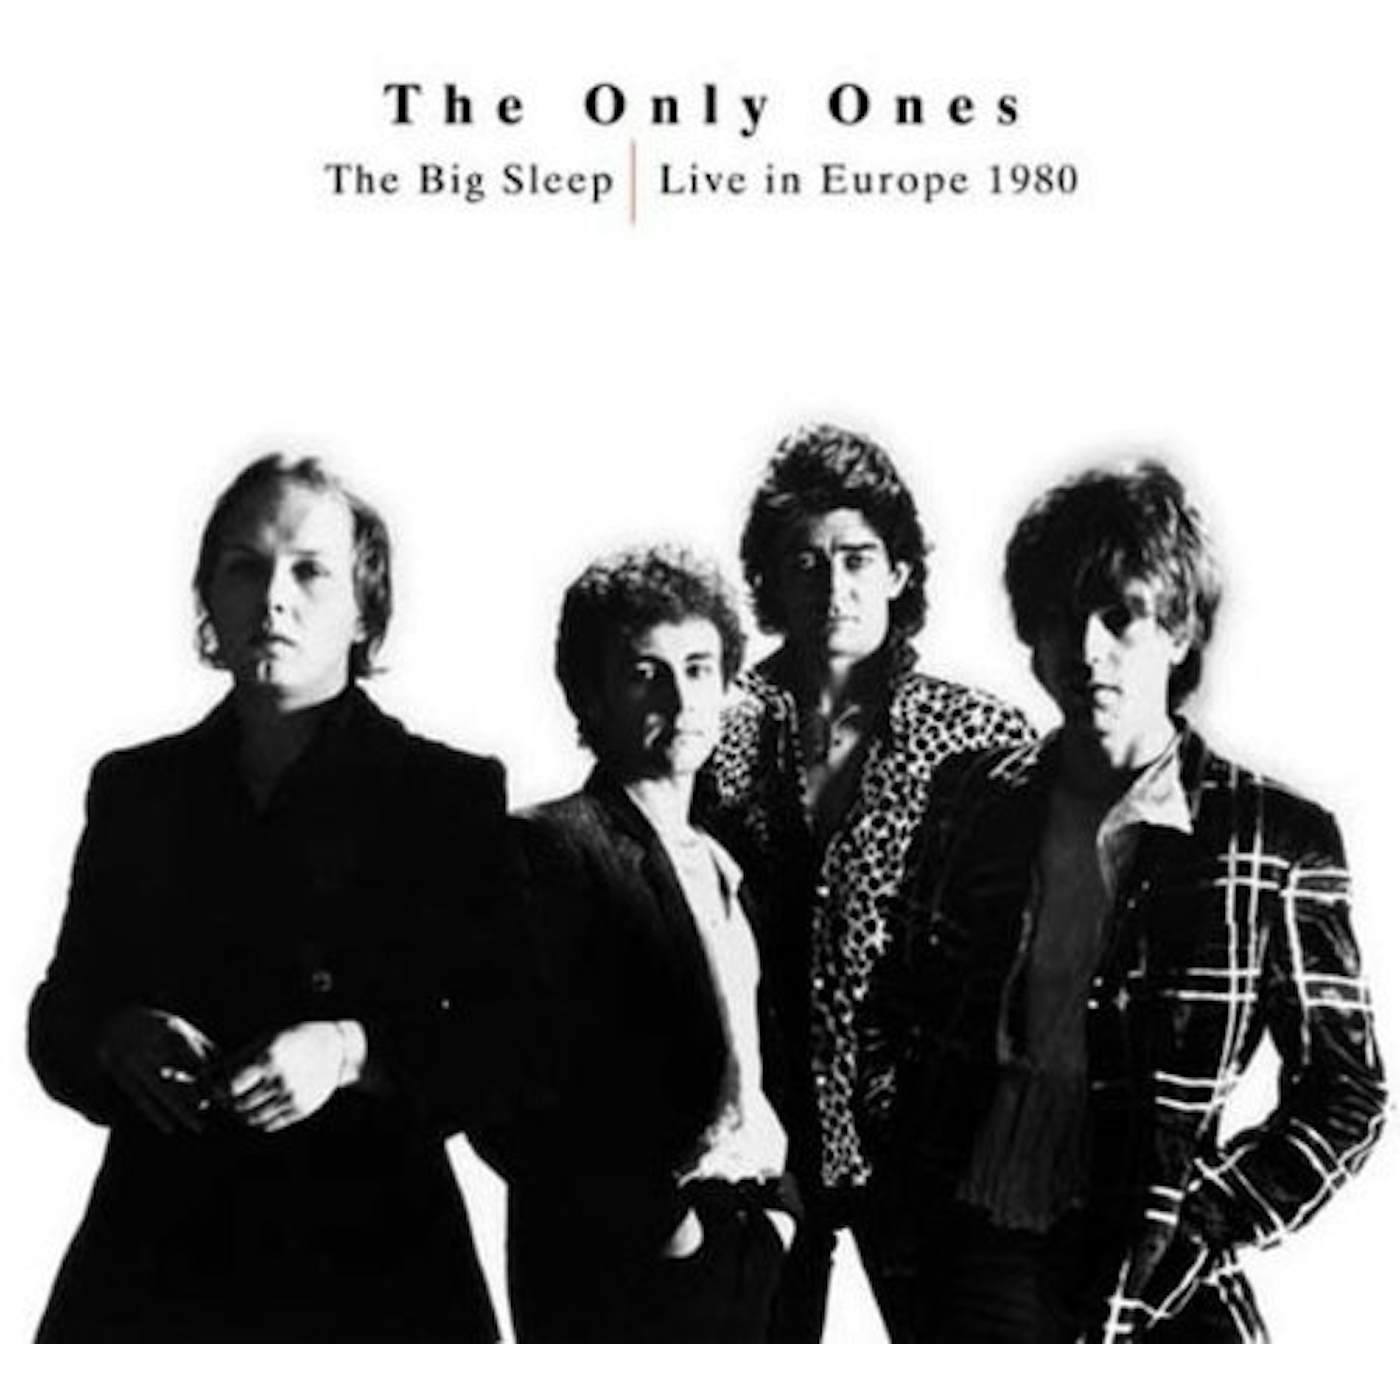 The Only Ones BIG SLEEP: LIVE IN EUROPE 1980 Vinyl Record